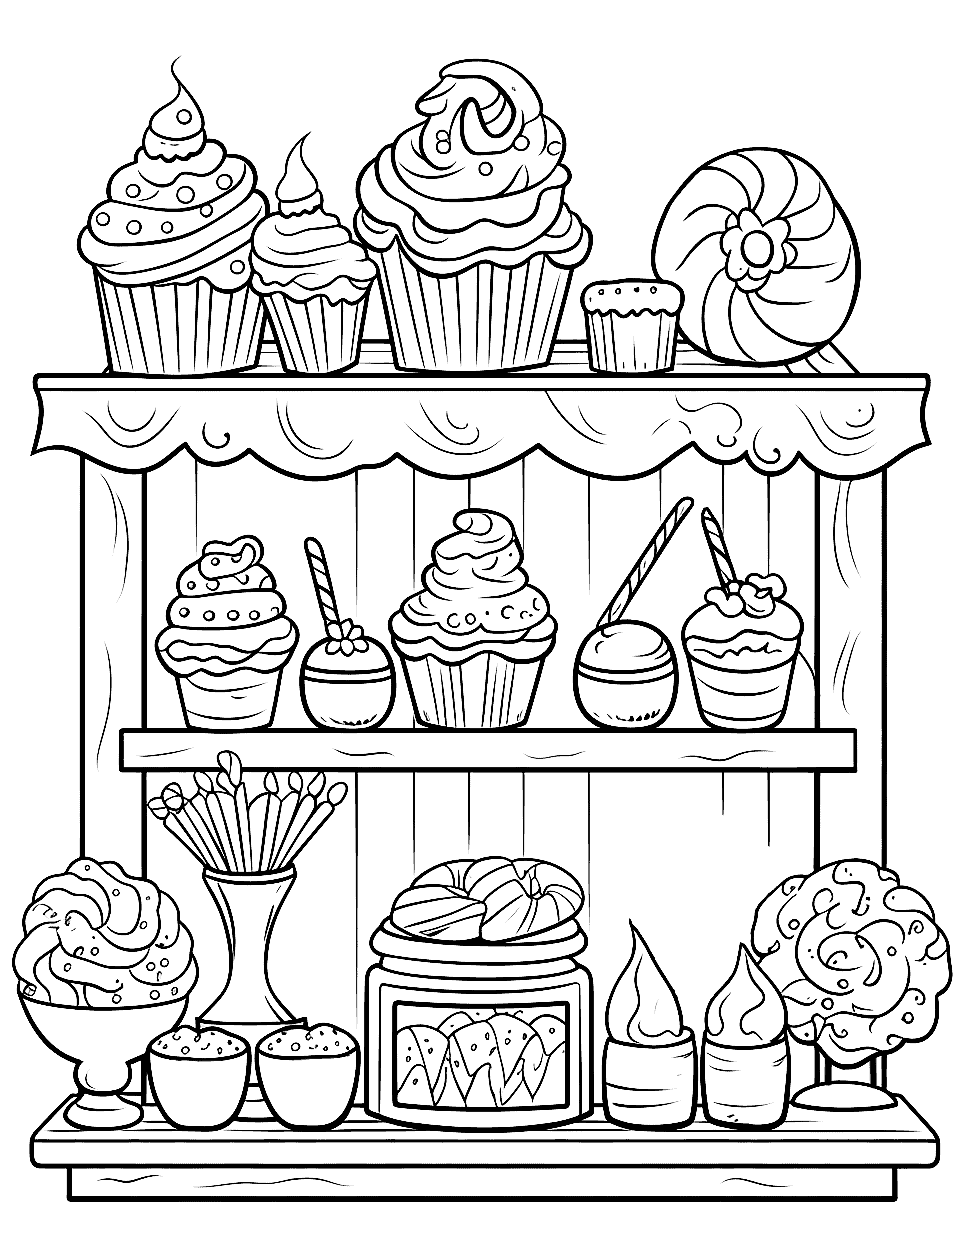 Sweet Shop Bakery Candy Coloring Page - A cozy bakery scene with shelves filled with candy and cakes.